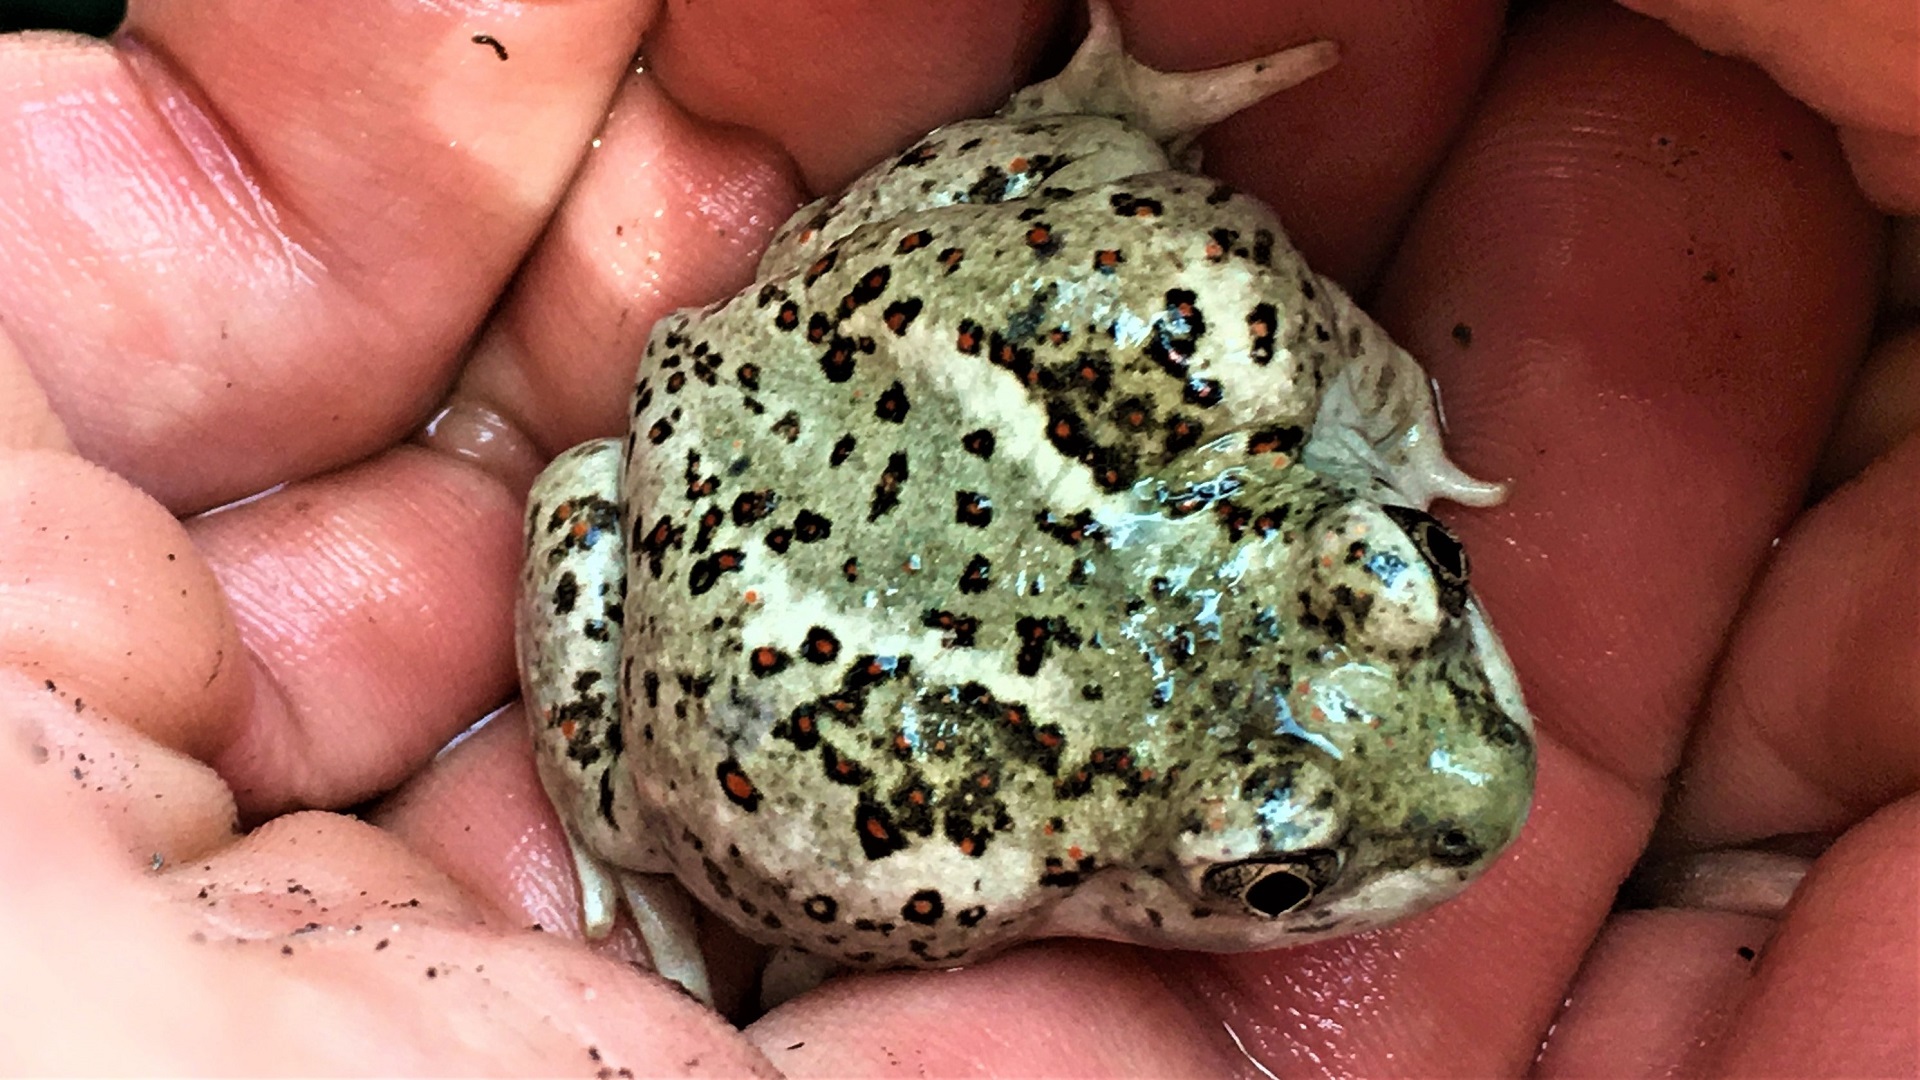 A green frog with black/orange spots in someone’s hands